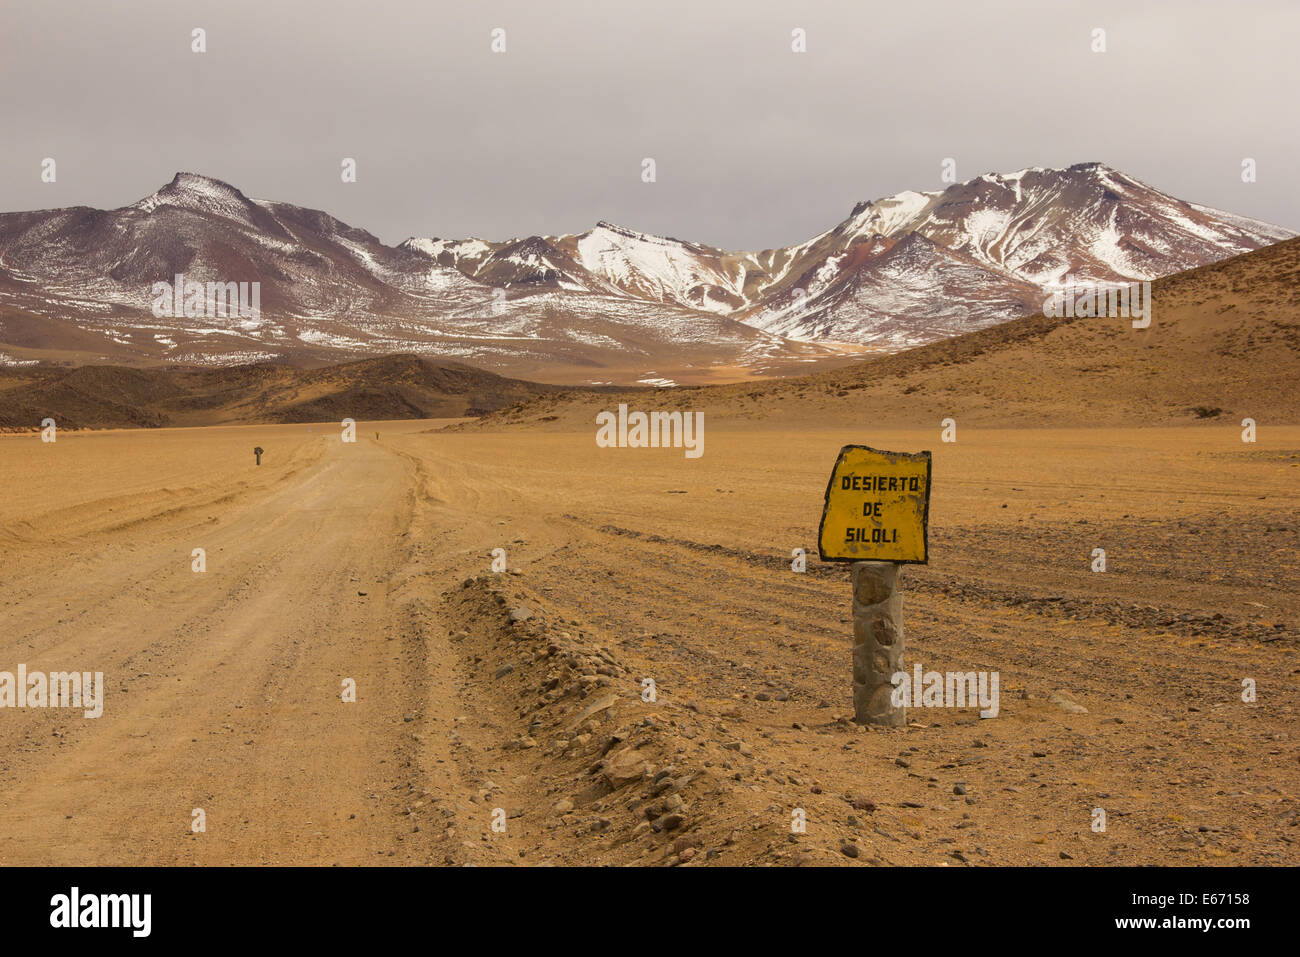 Siloli Desert sign and road in south Bolivia with Stock Photo